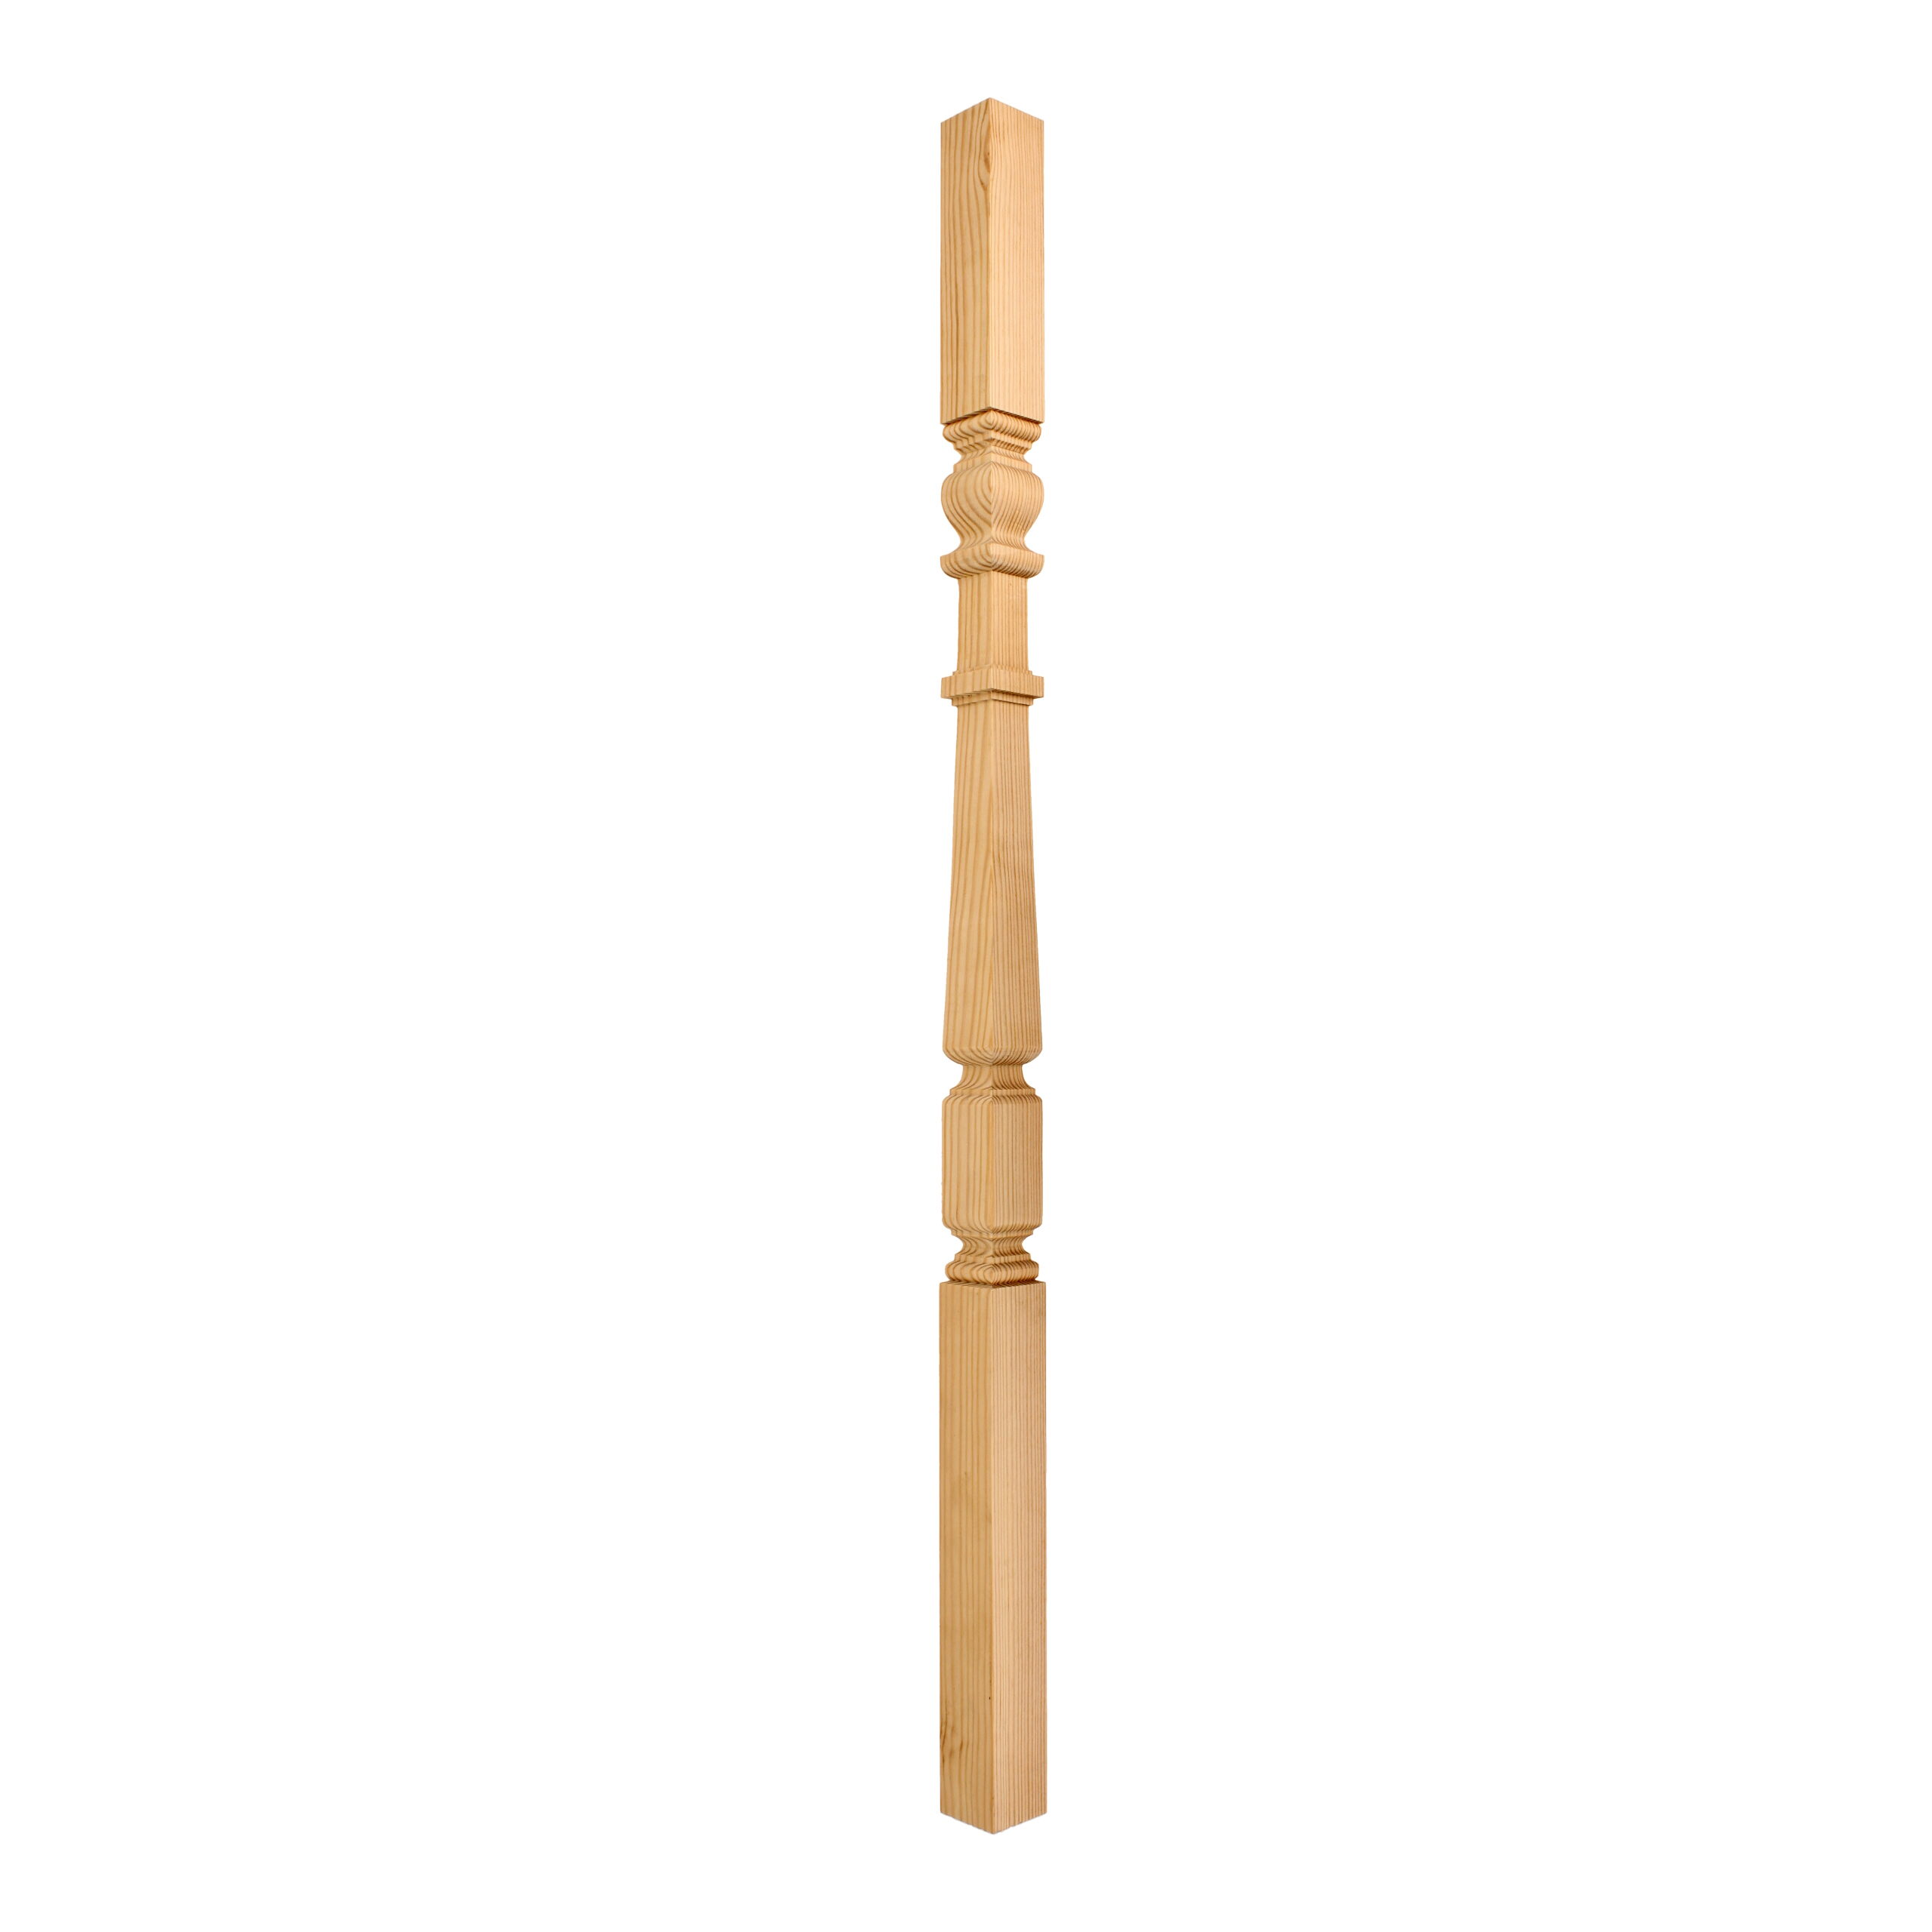 Pine-Square Turned Edwardian-41mm x 900 - Wooden staircase spindle.